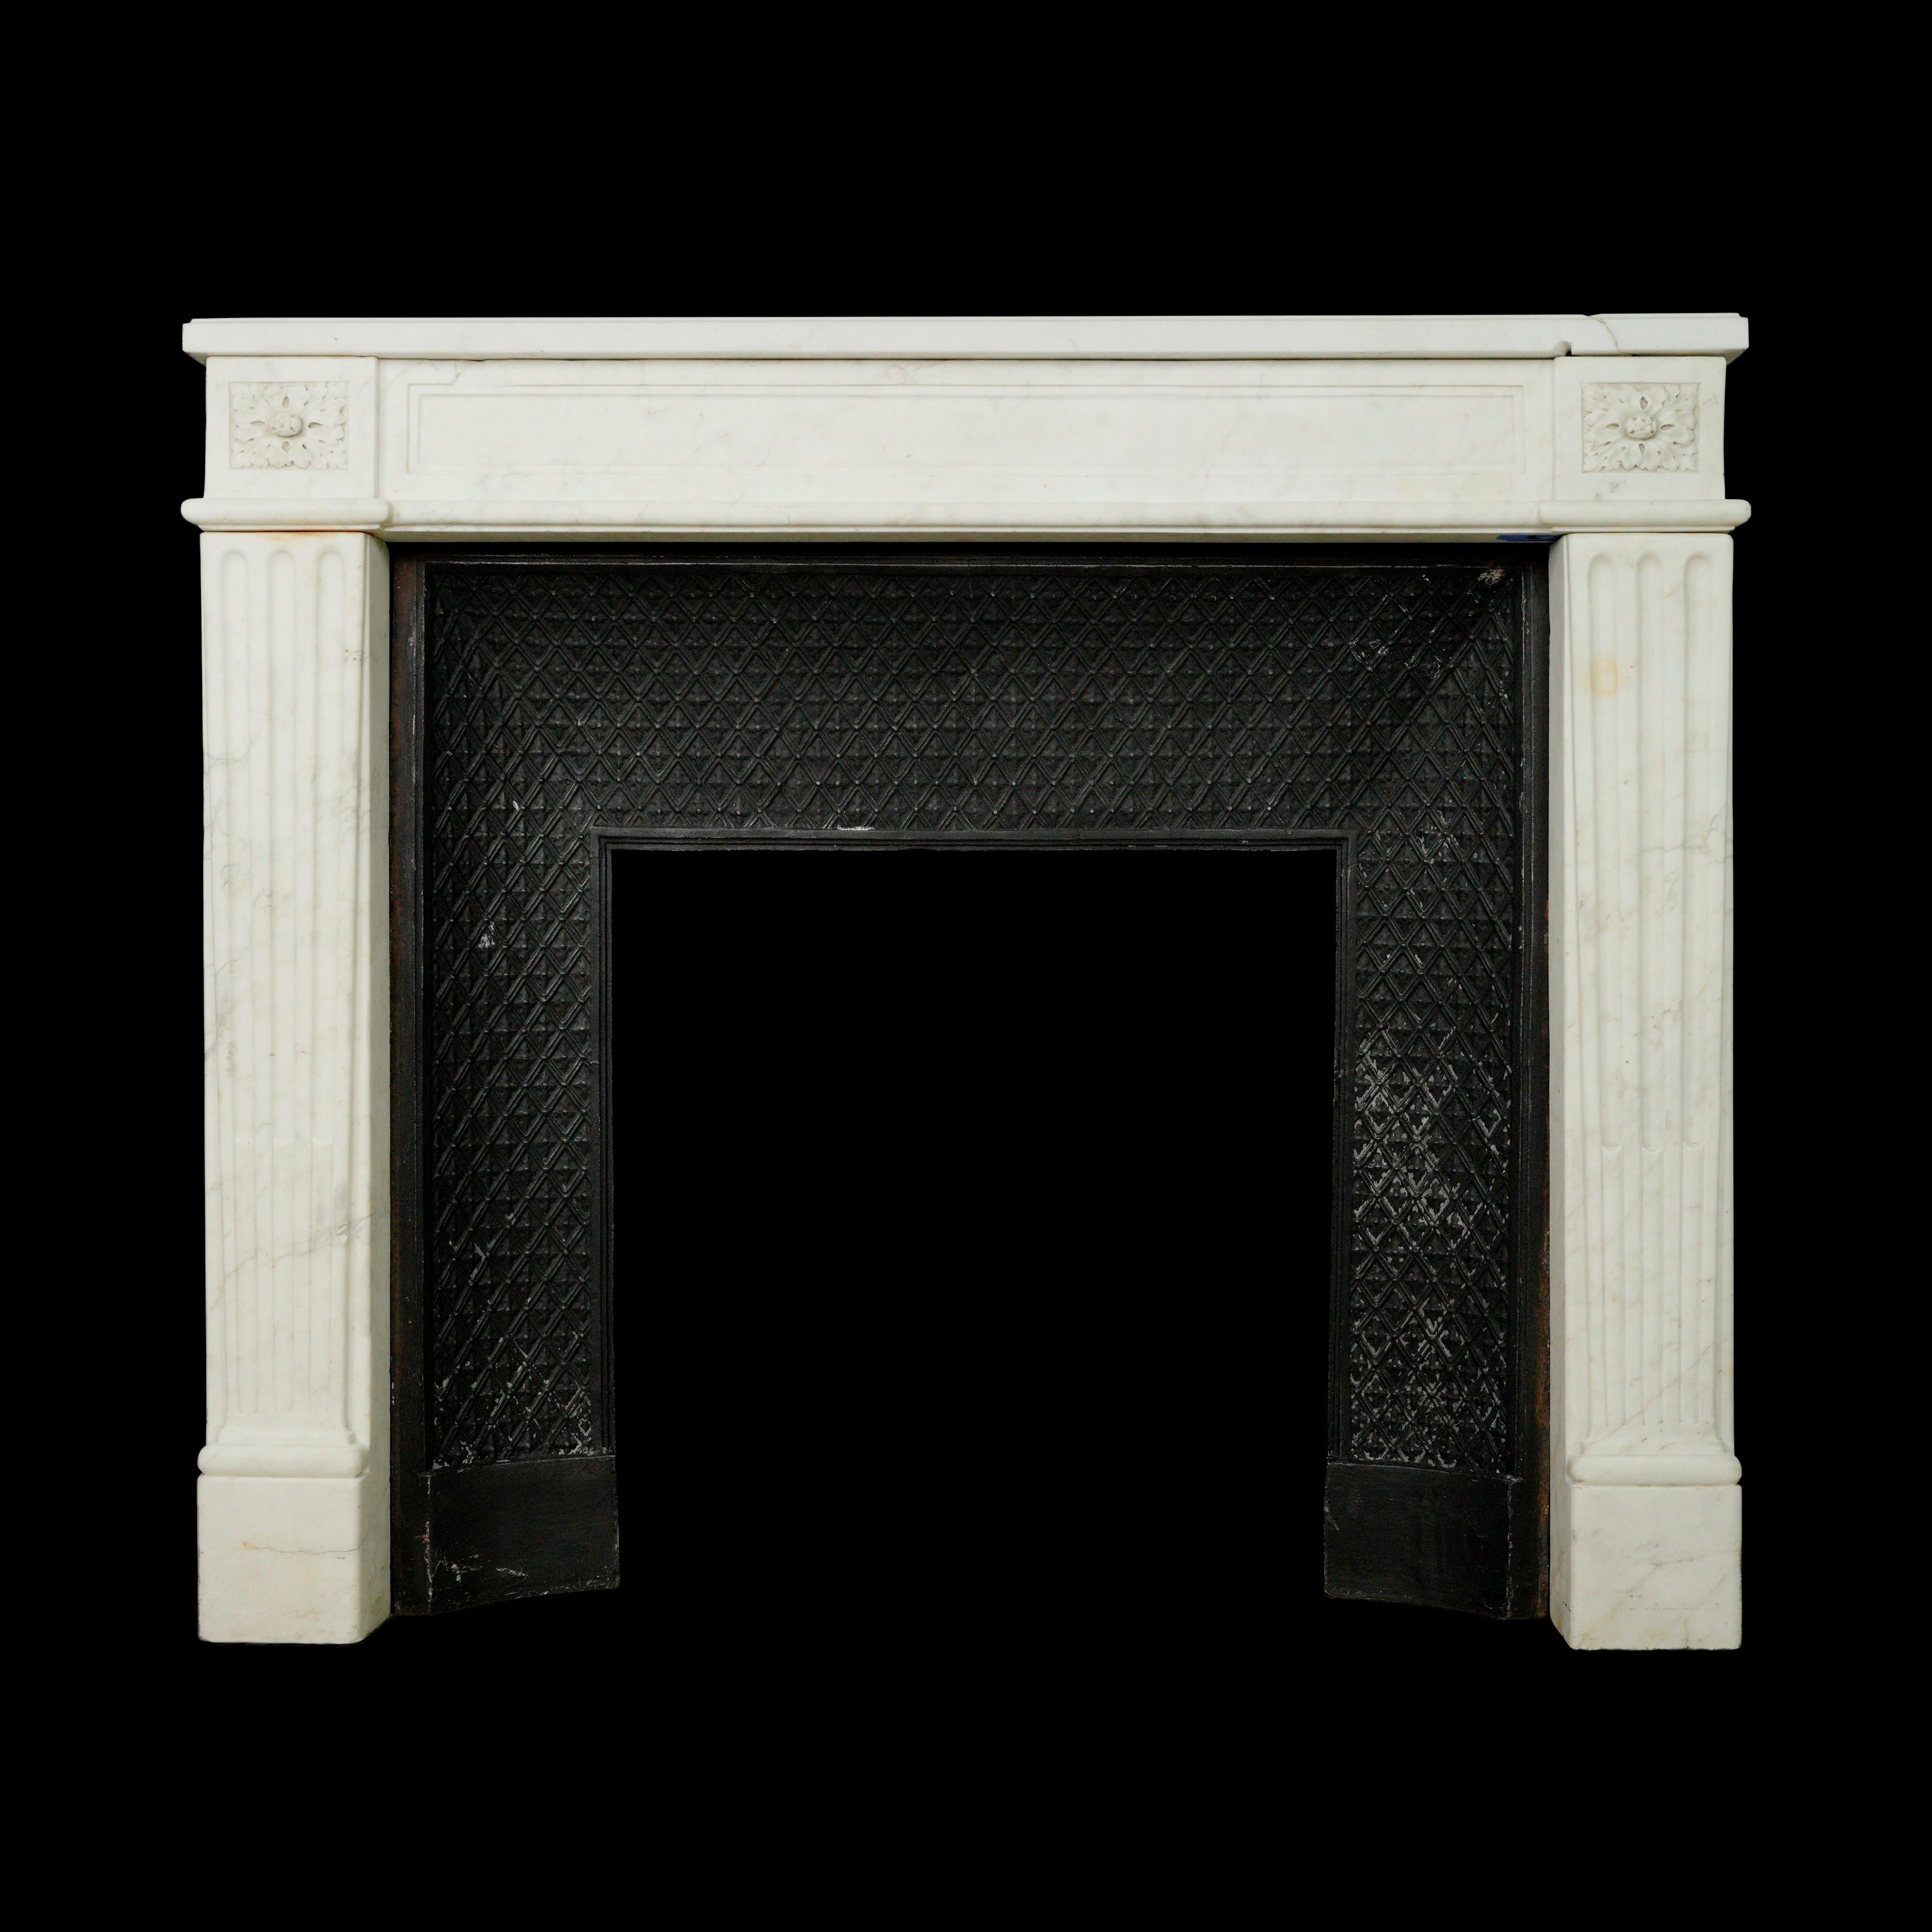 This piece was procured from an esteemed estate located in Greenwich, Connecticut. The white marble mantel, in the distinctive Louis XVI style, features a cast iron insert, contributing to its classic and refined appearance. However, it has